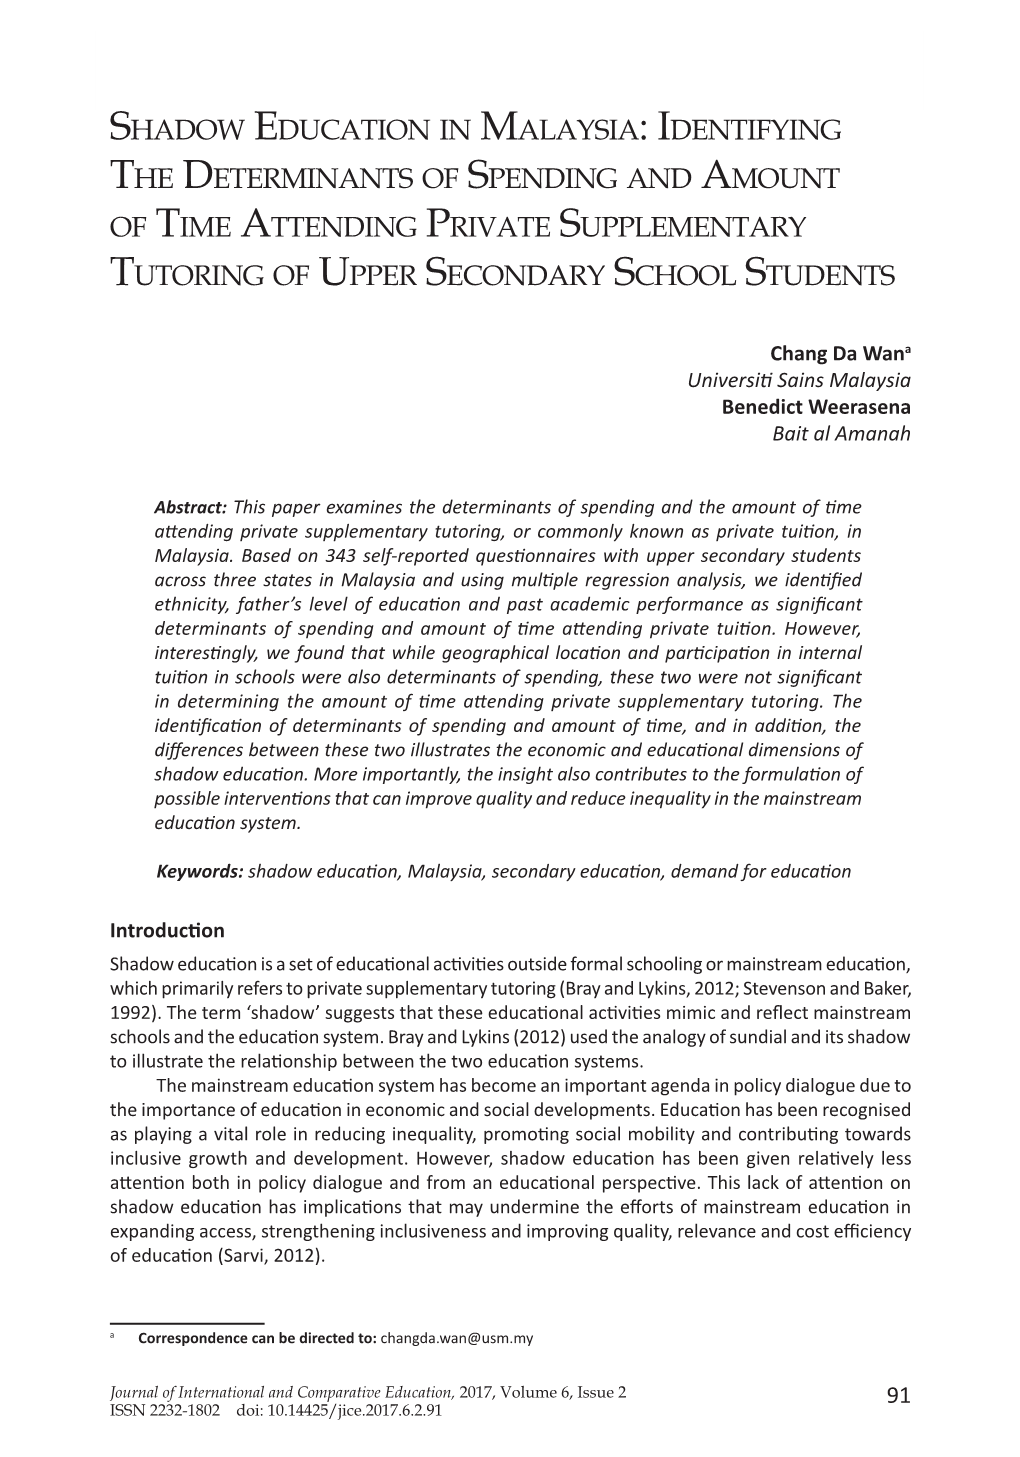 Shadow Education in Malaysia: Identifying the Determinants of Spending and Amount of Time Attending Private Supplementary Tutoring of Upper Secondary School Students